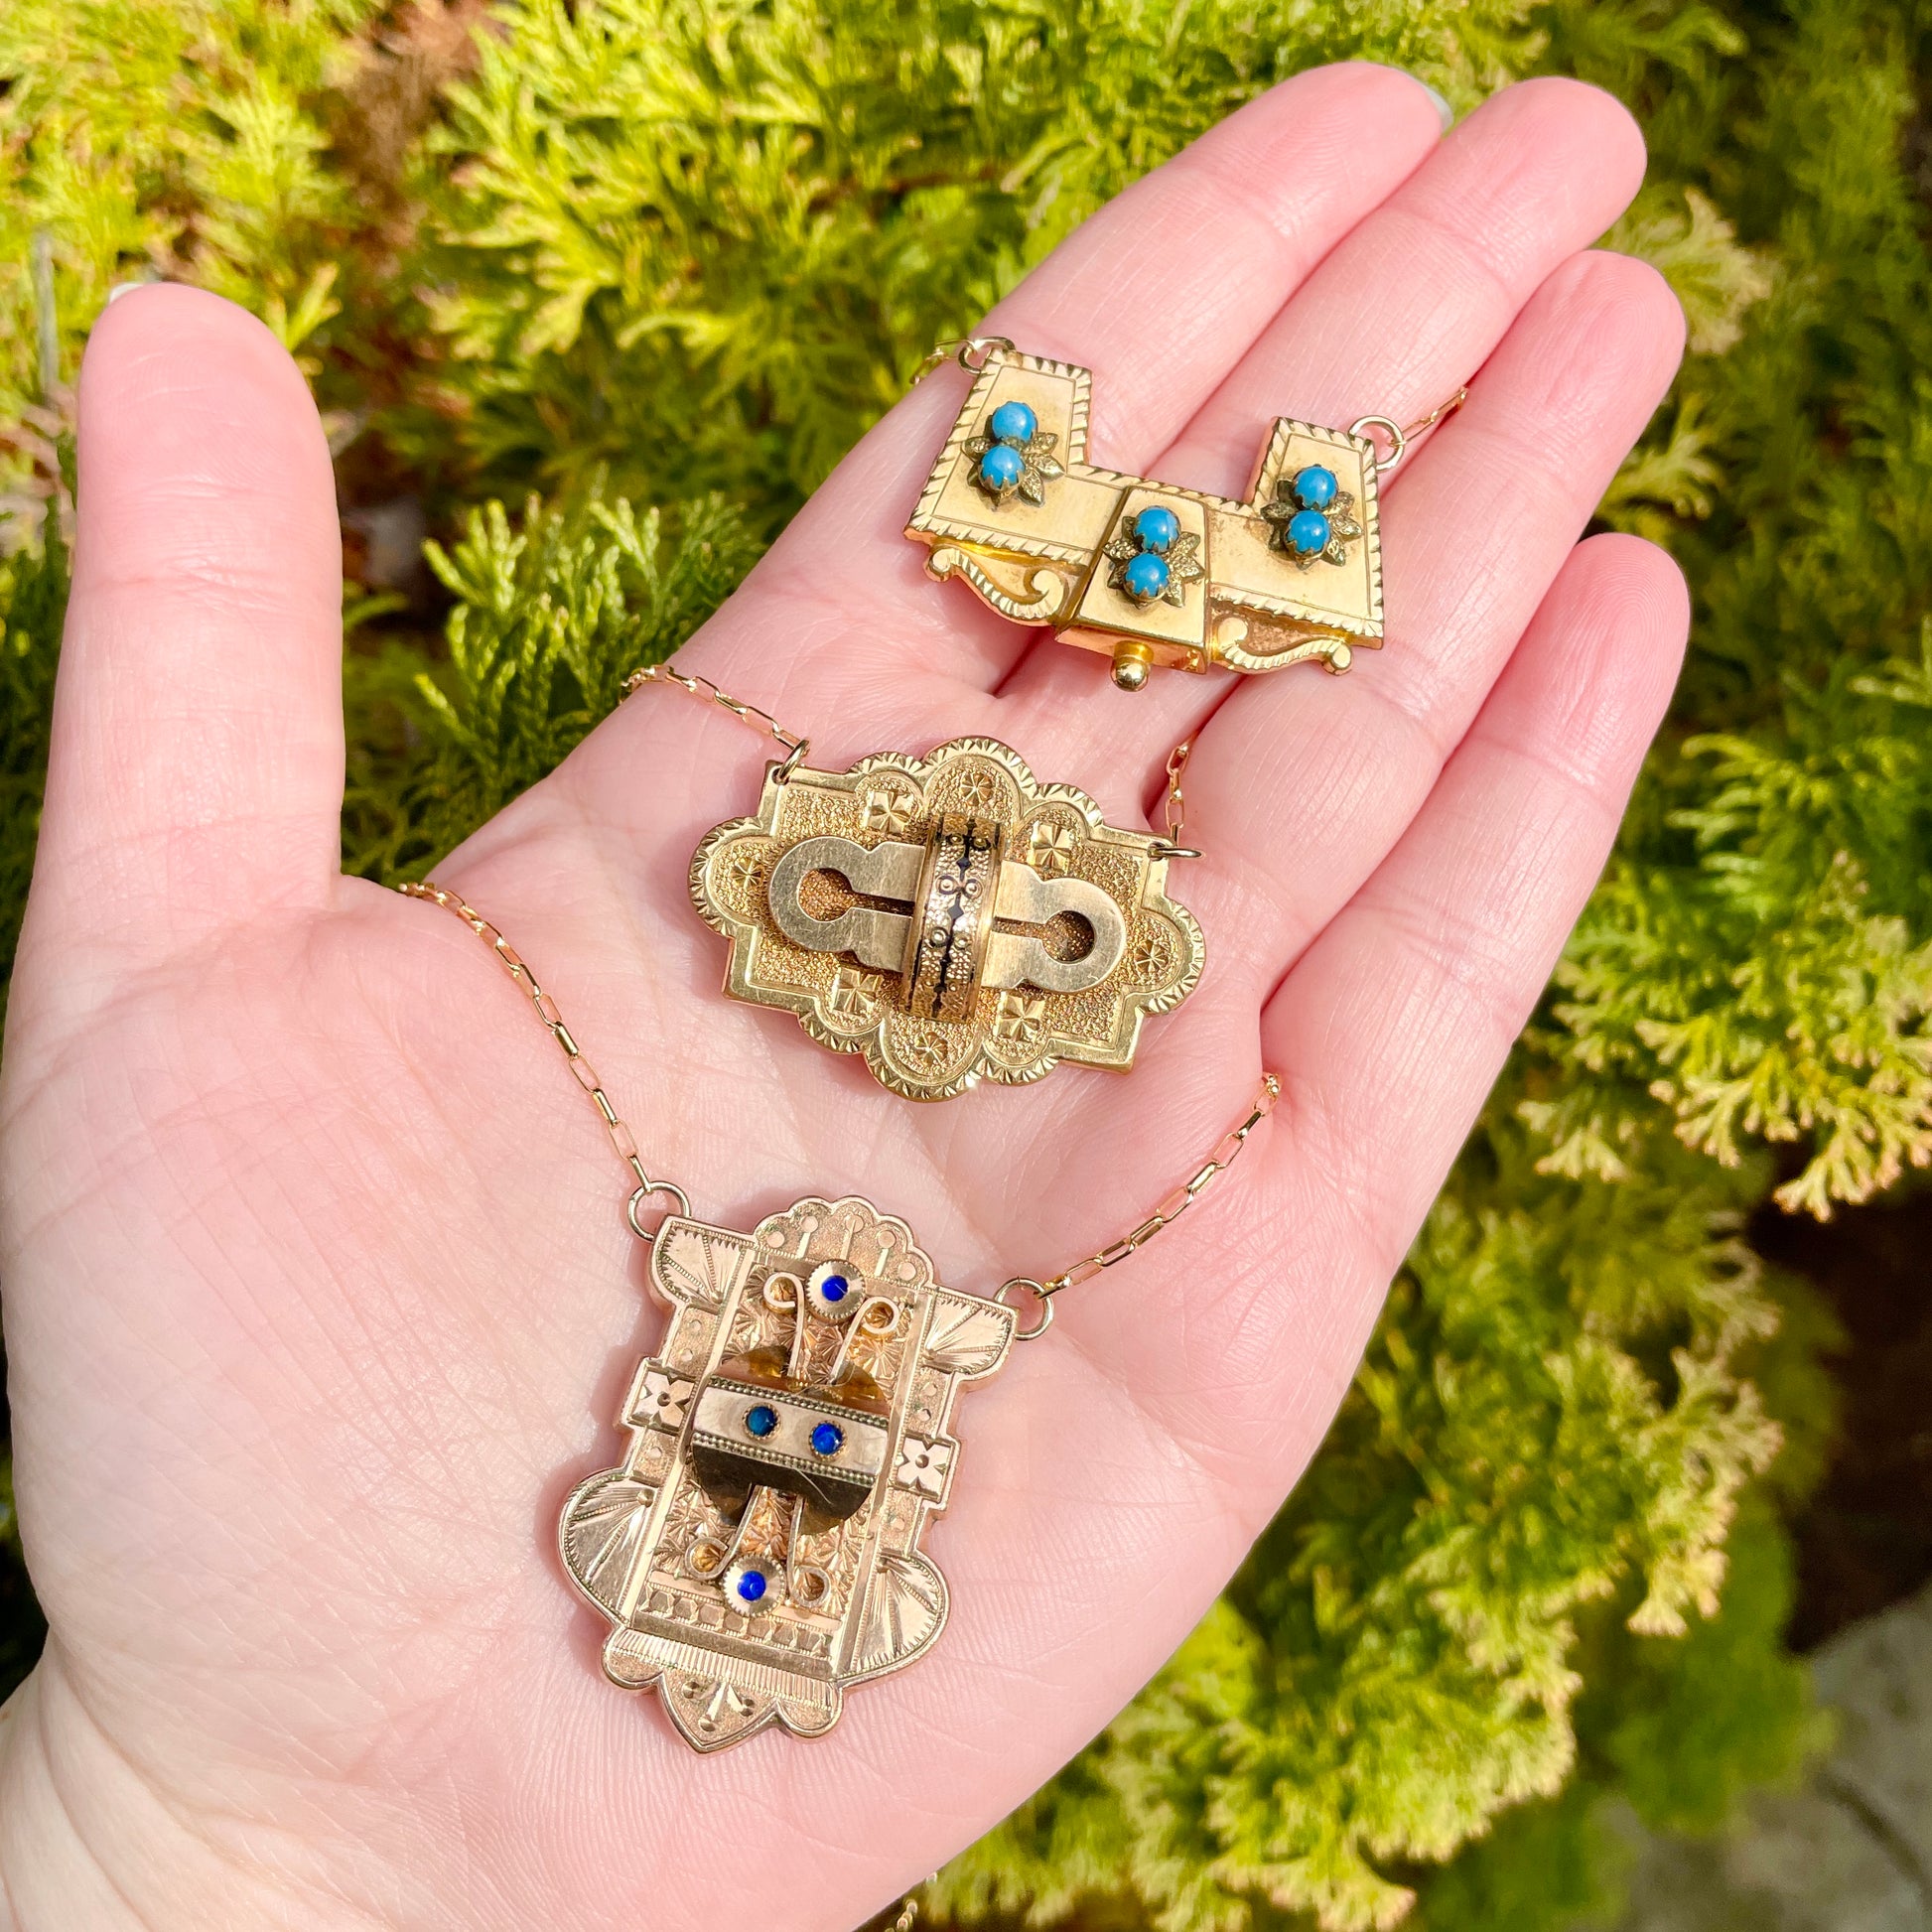 Three goregous and statement making antique Victorian brooch conversion necklaces in the palm of a hand against an evergreen background